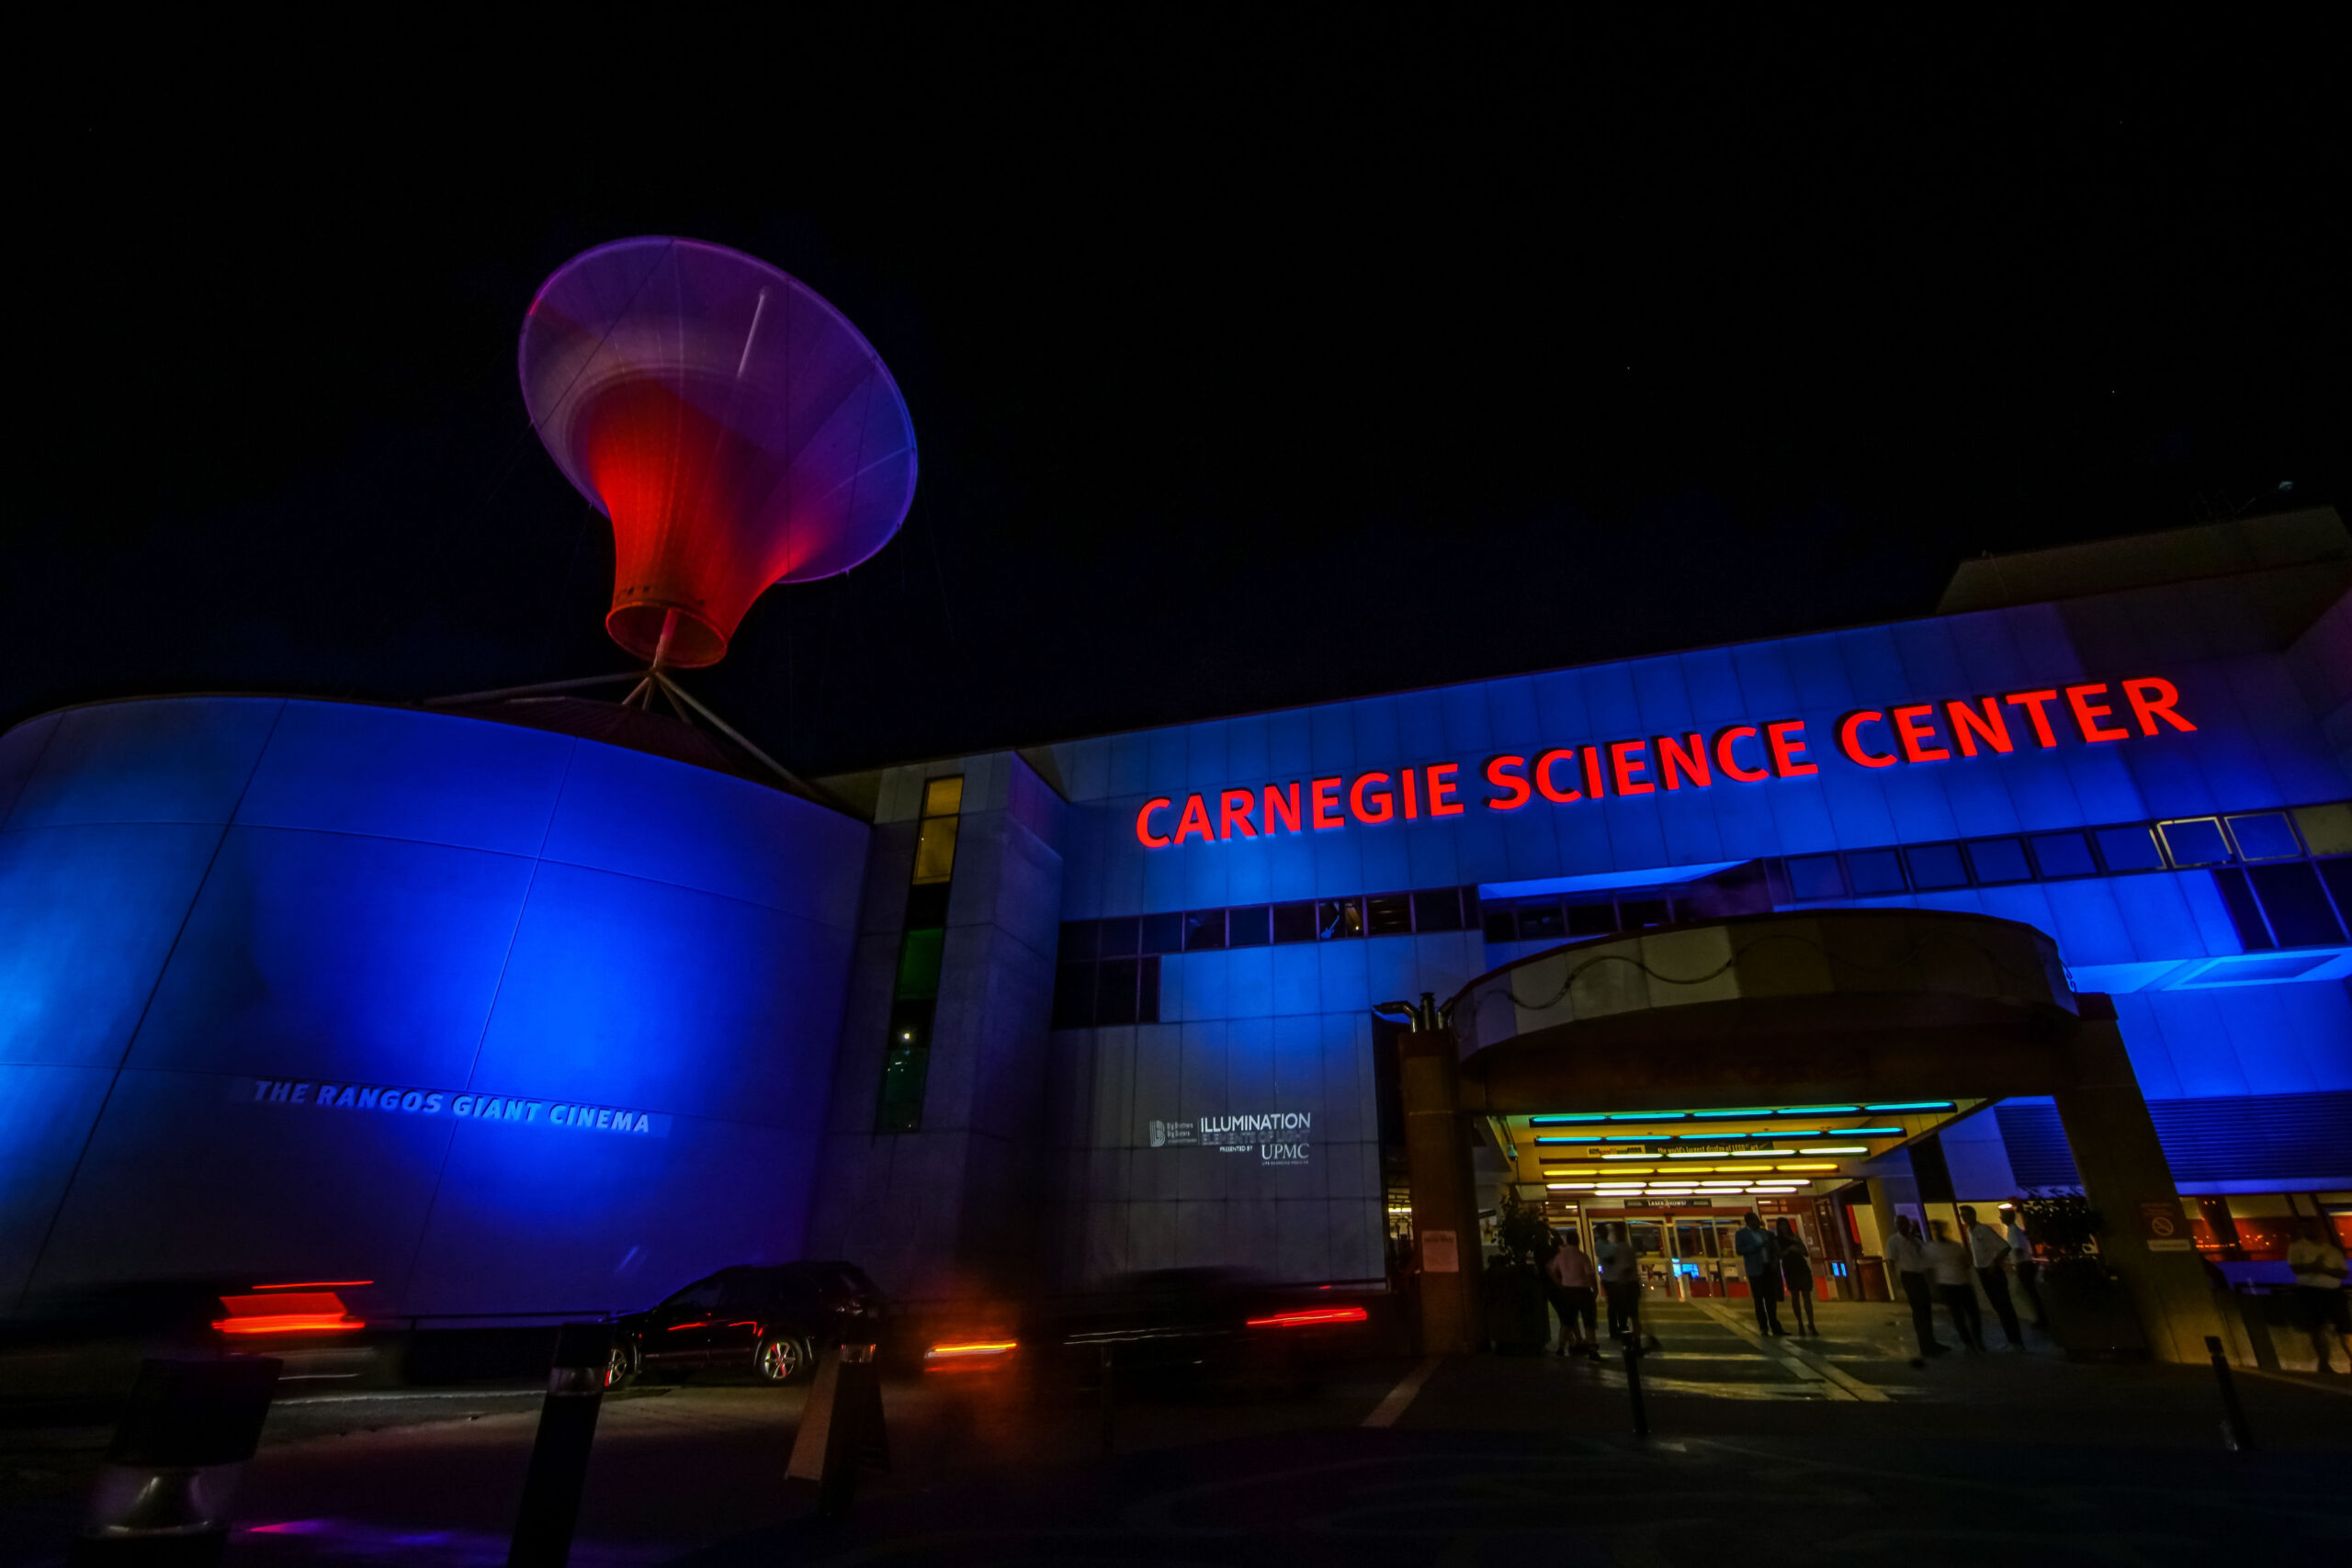 A colorful nighttime photo of the Carnegie Science Center in the evening during an event. The building is lit up with red and blue lights.